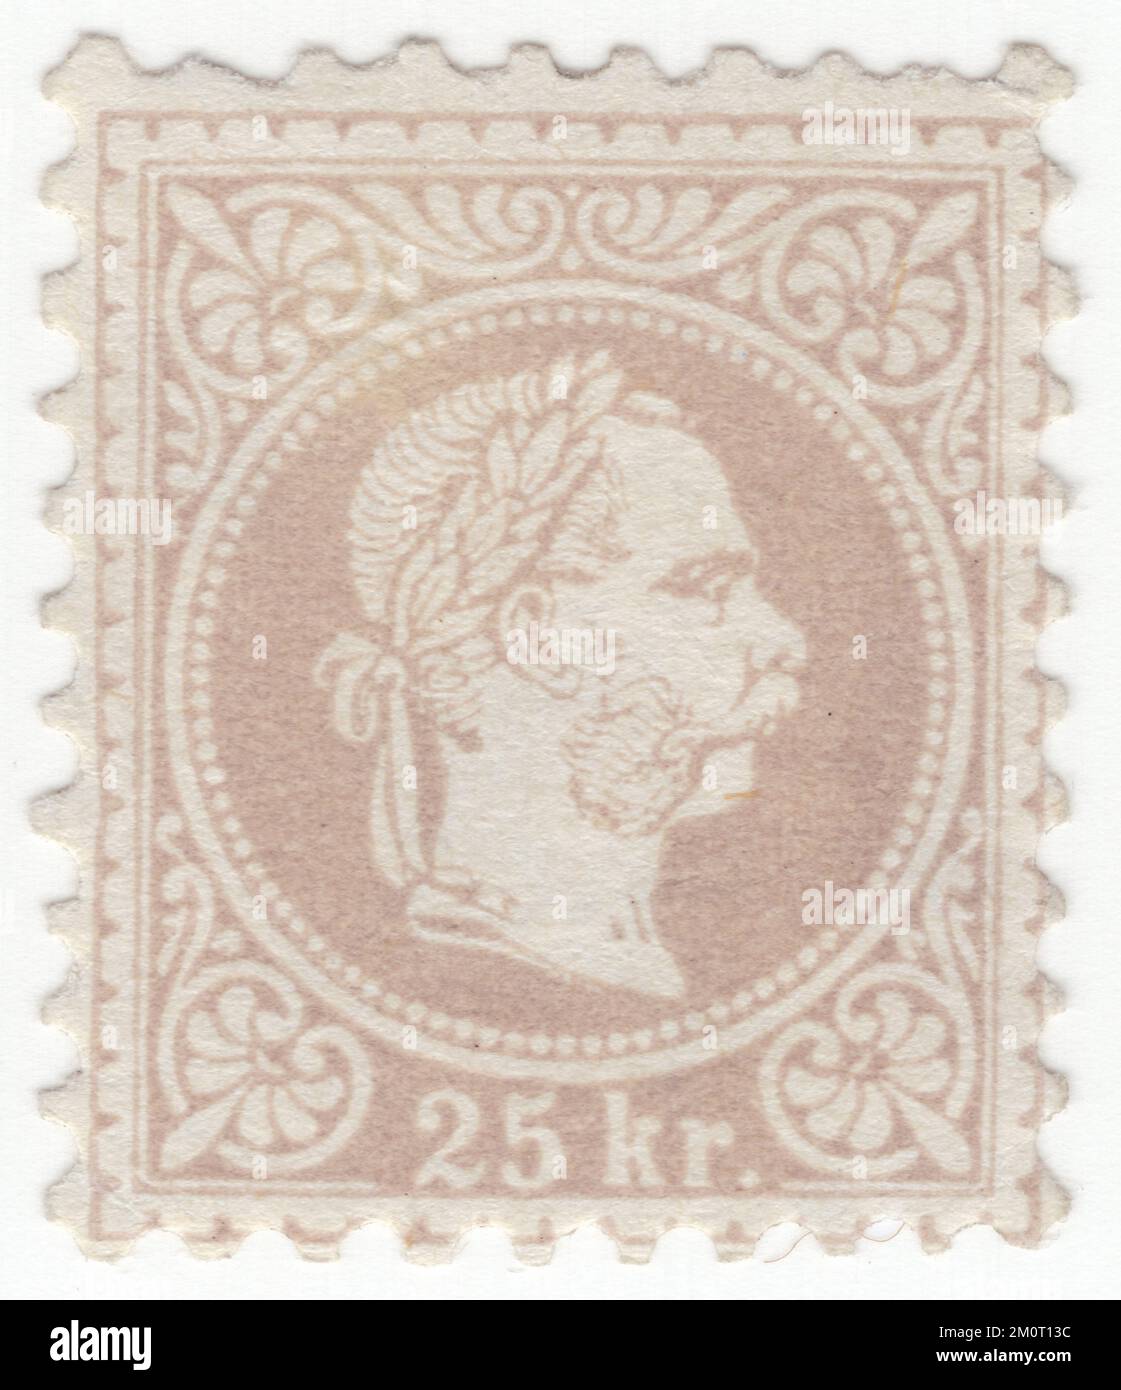 AUSTRIA — 1867: An 25 kreuzer lilac postage stamp depicting Embossed portrait of young Austrian Monarch Emperor Franz Josef. Franz Joseph I or Francis Joseph I was Emperor of Austria, King of Hungary, and the other states of the Habsburg monarchy from 2 December 1848 until his death on 21 November 1916. In the early part of his reign, his realms and territories were referred to as the Austrian Empire, but were reconstituted as the dual monarchy of the Austro-Hungarian Empire in 1867. From 1 May 1850 to 24 August 1866, Franz Joseph was also President of the German Confederation Stock Photo